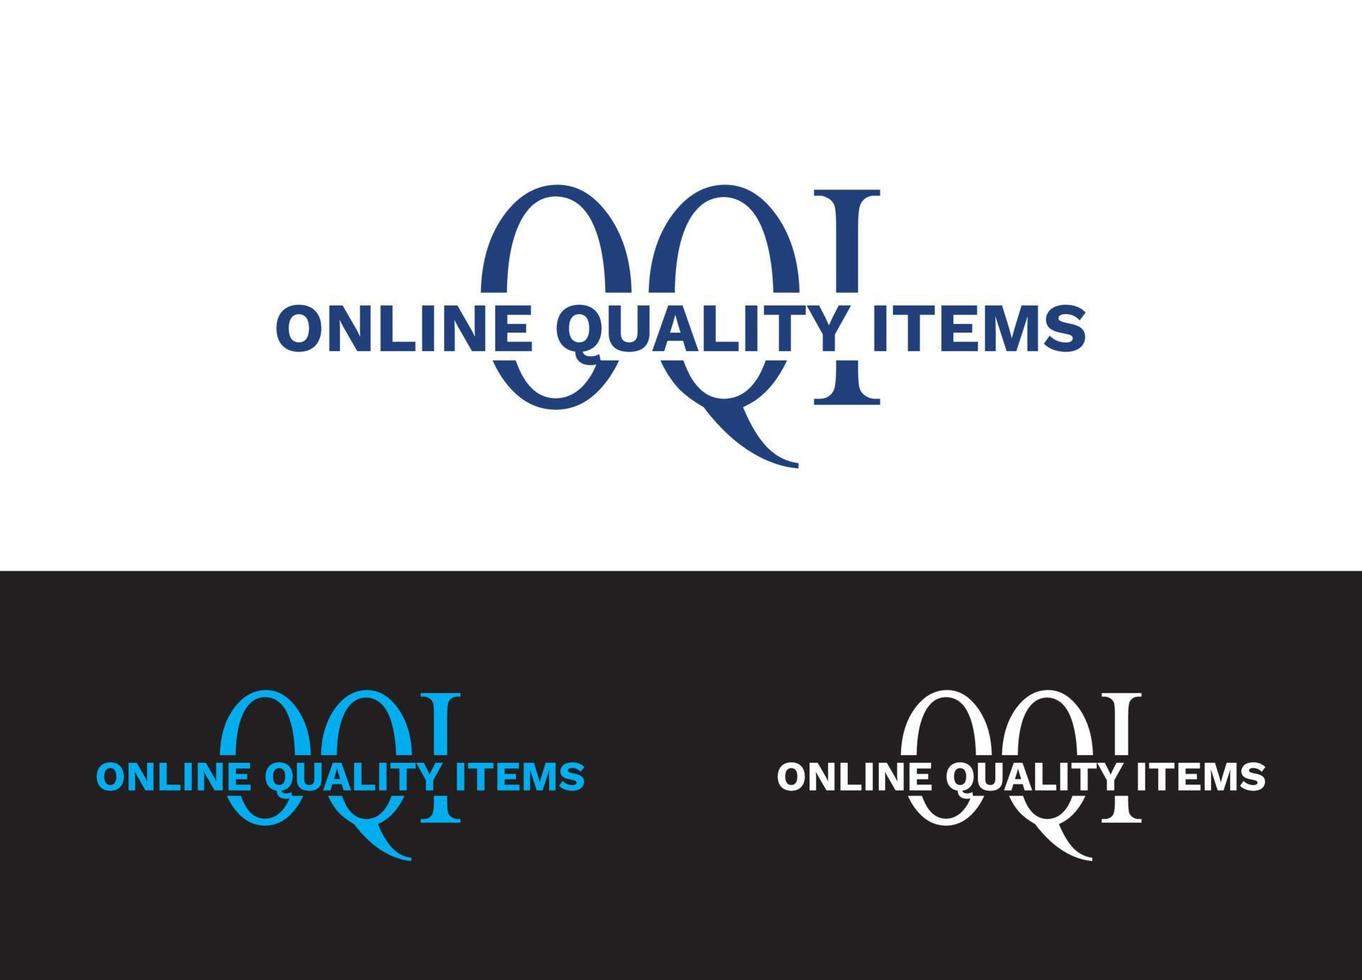 Online Quality Items Logo or Icon Design Vector Image Template